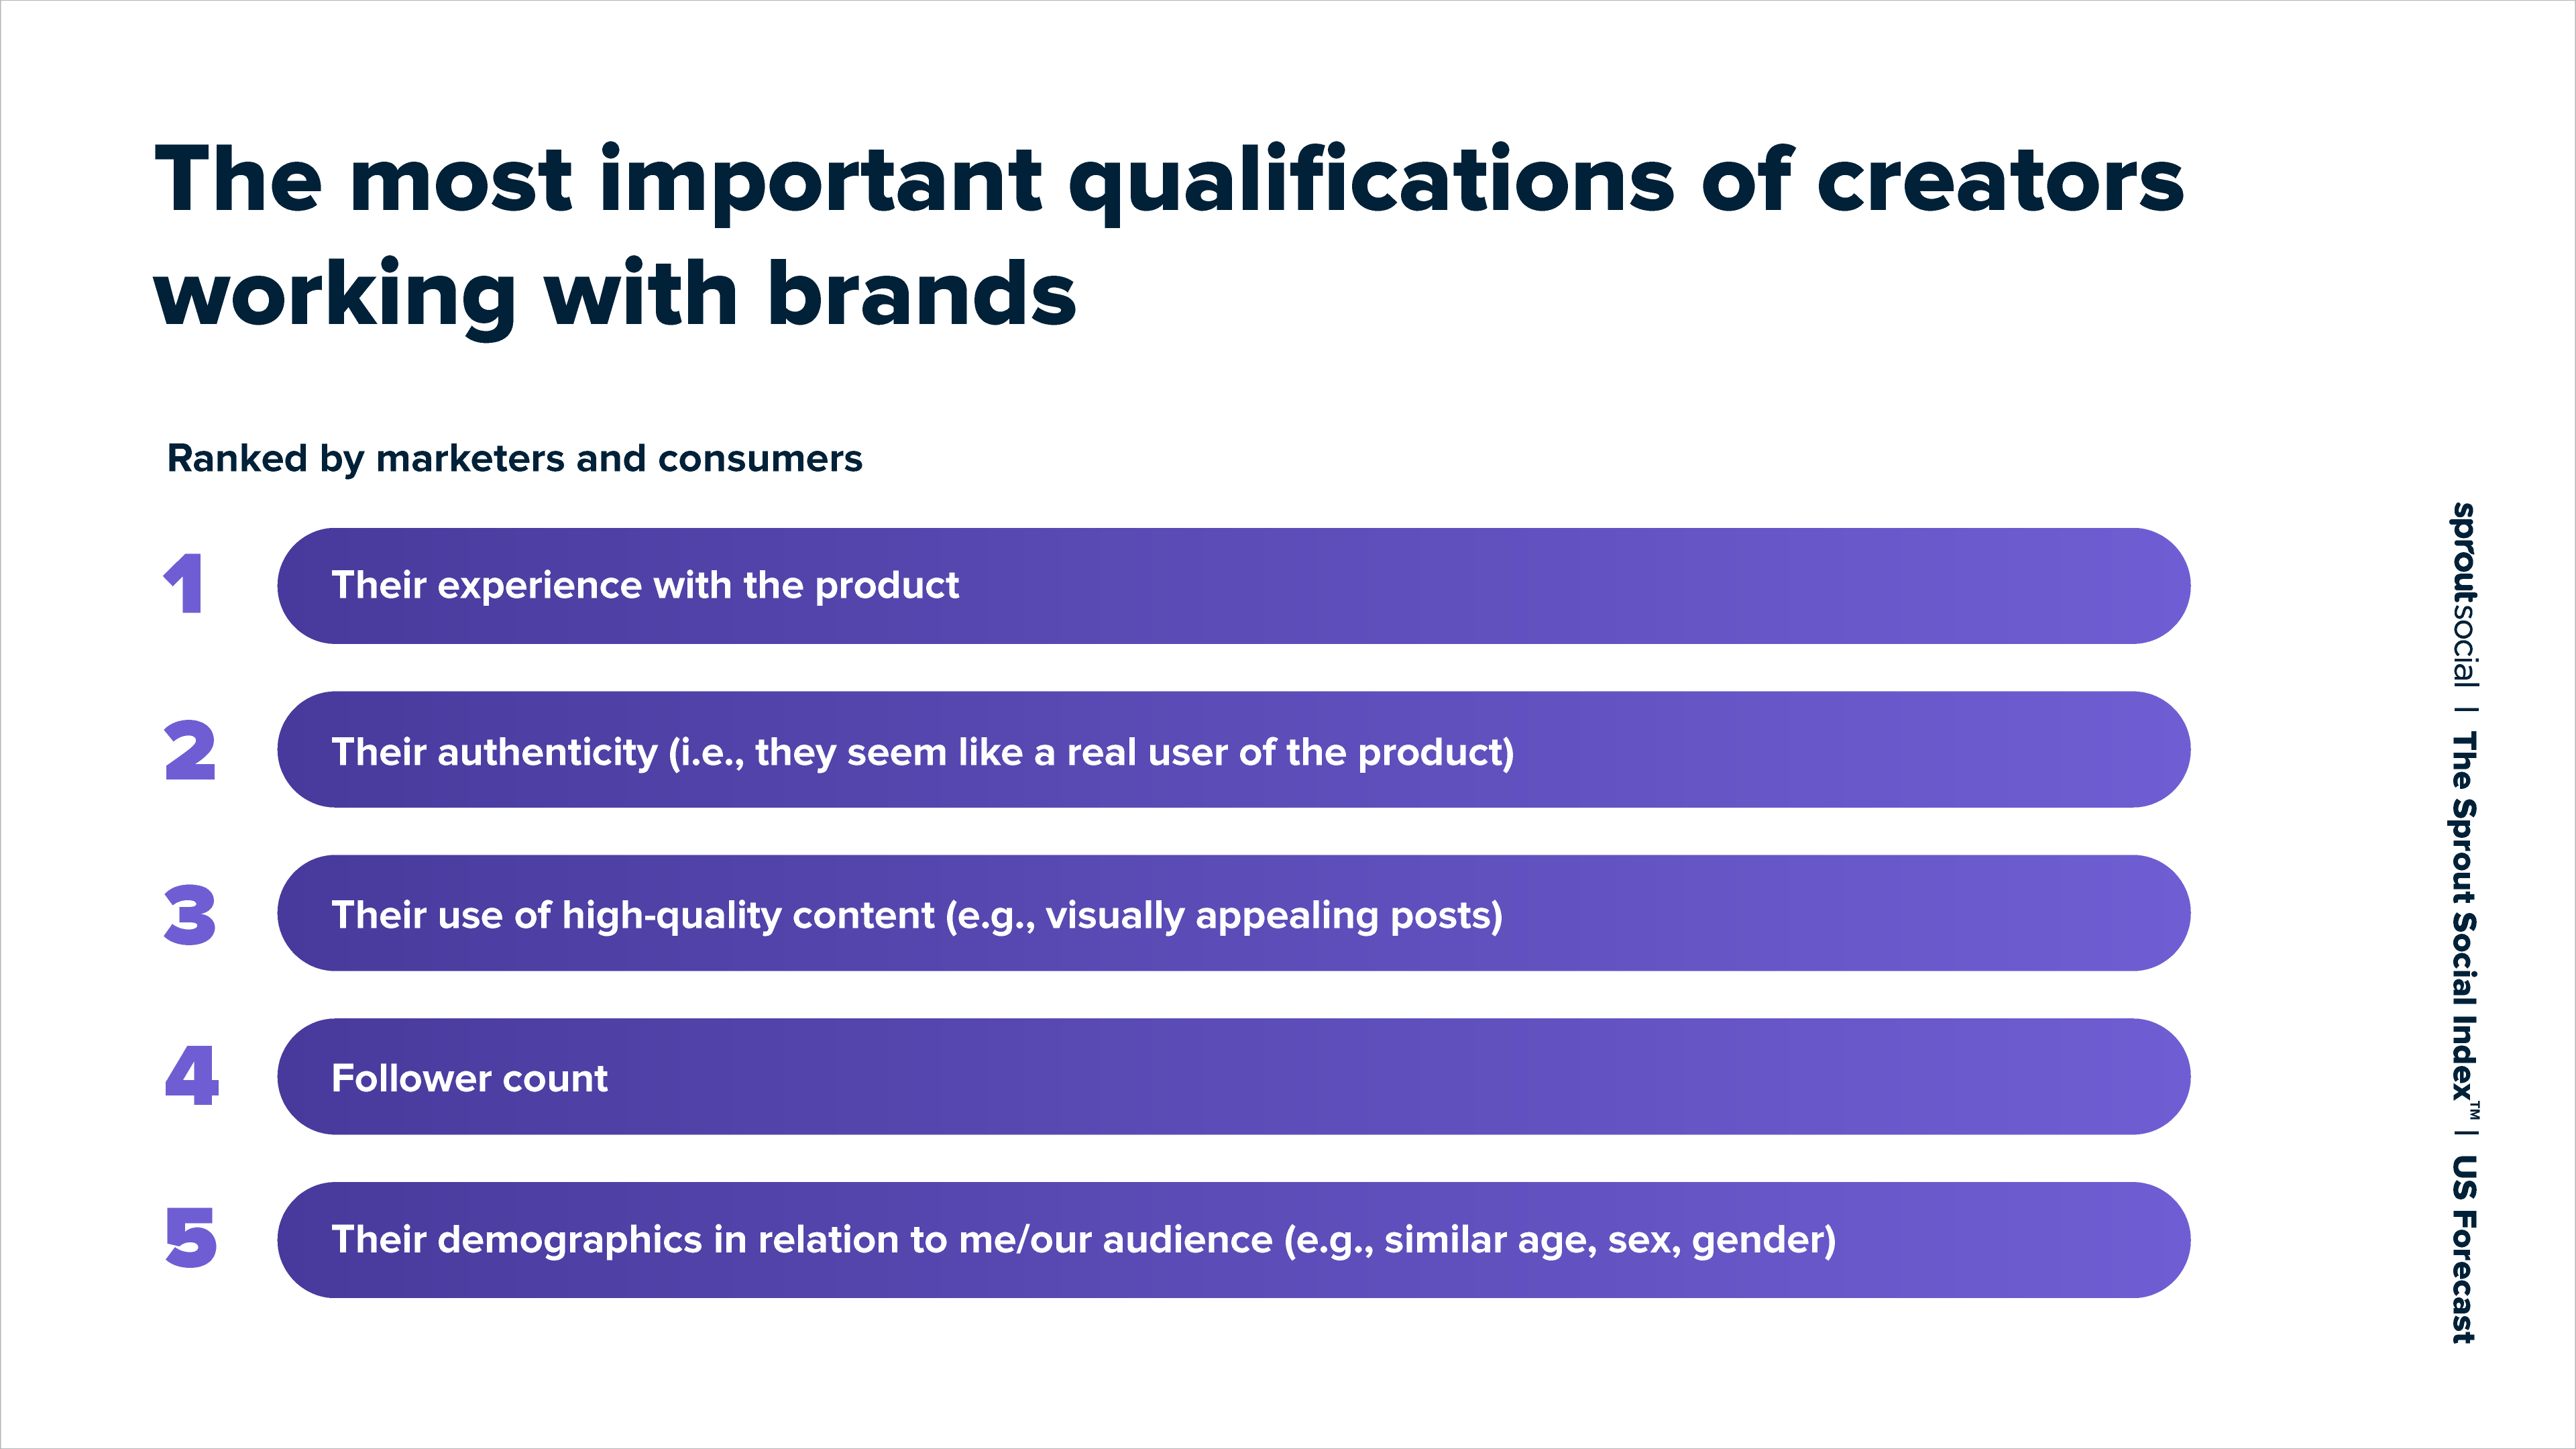 Table ranking the most important qualifications of creators working with brands (ranked by consumers and marketers). 